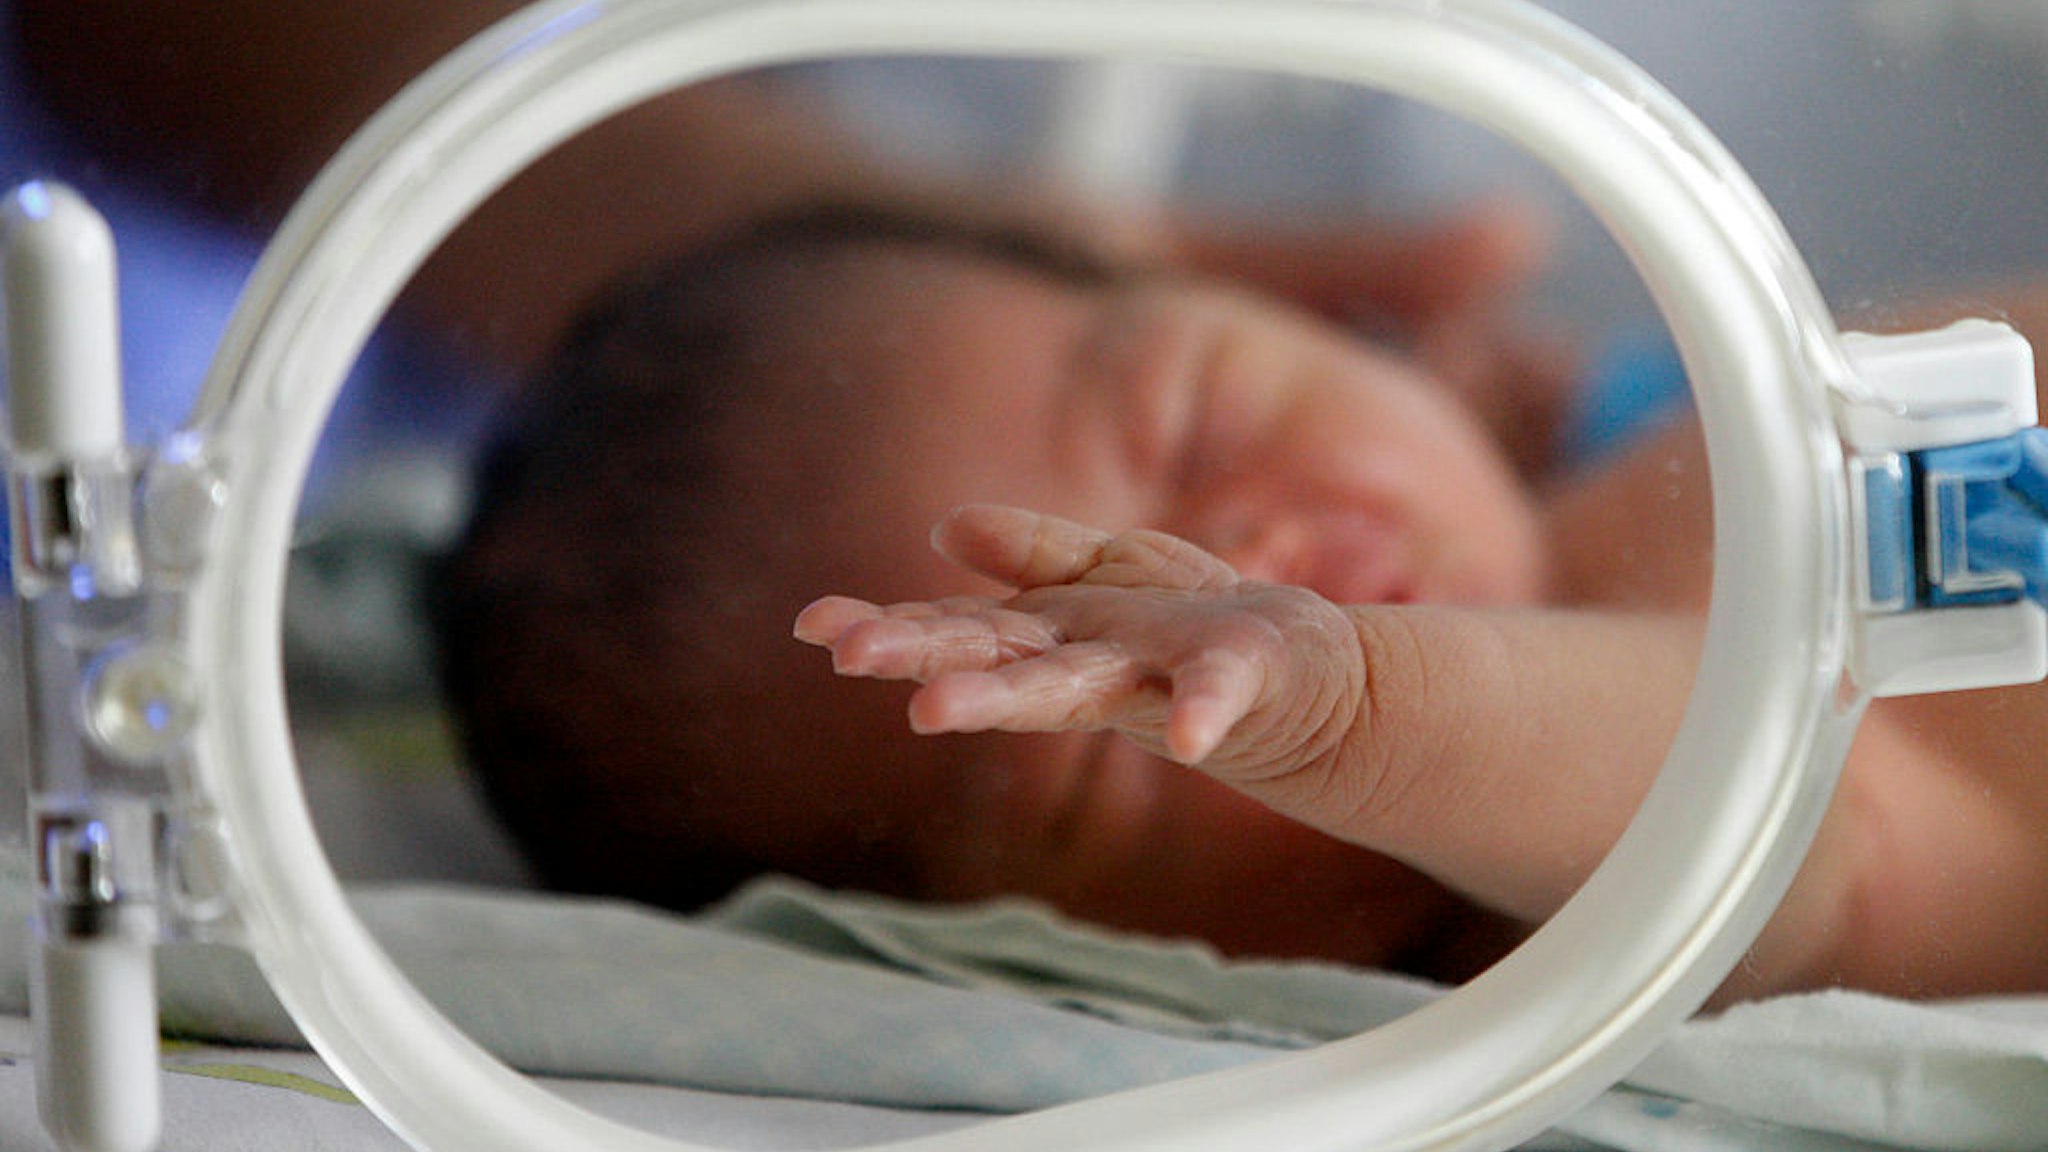 new baby is laying on a bed in a hosiptal in Huaibei, Anhui province, China on 12th November 2013. On Thursday, the government said it was relaxing the rules to allow all couples to have two children. (Photo by Jie Zhao/Corbis via Getty Images)